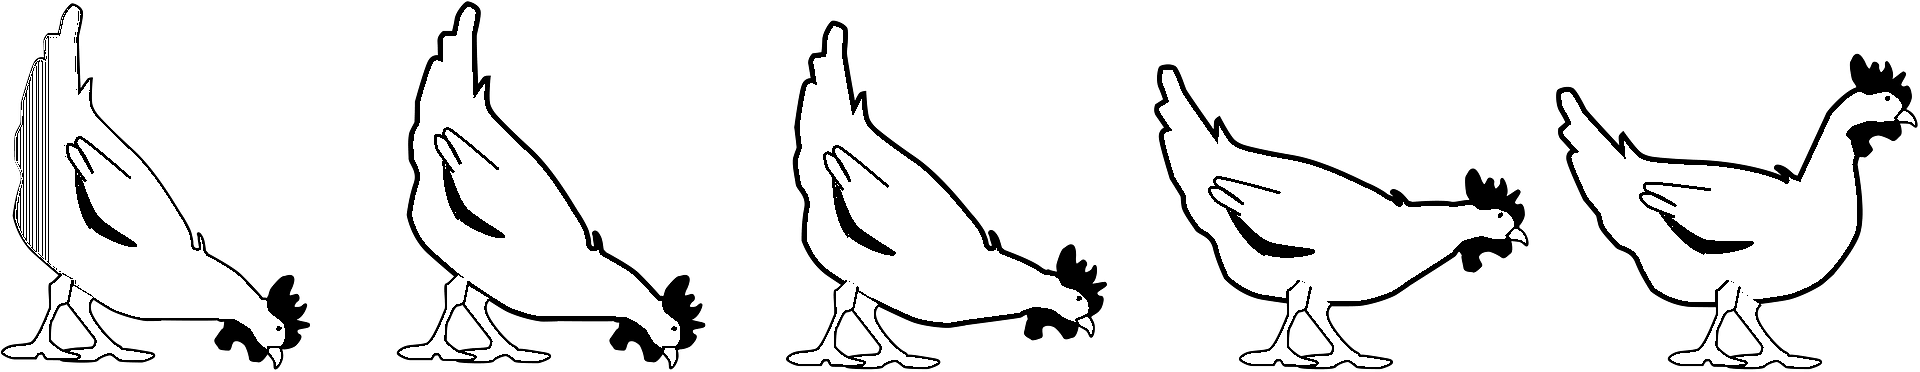 Coloring page of a hen